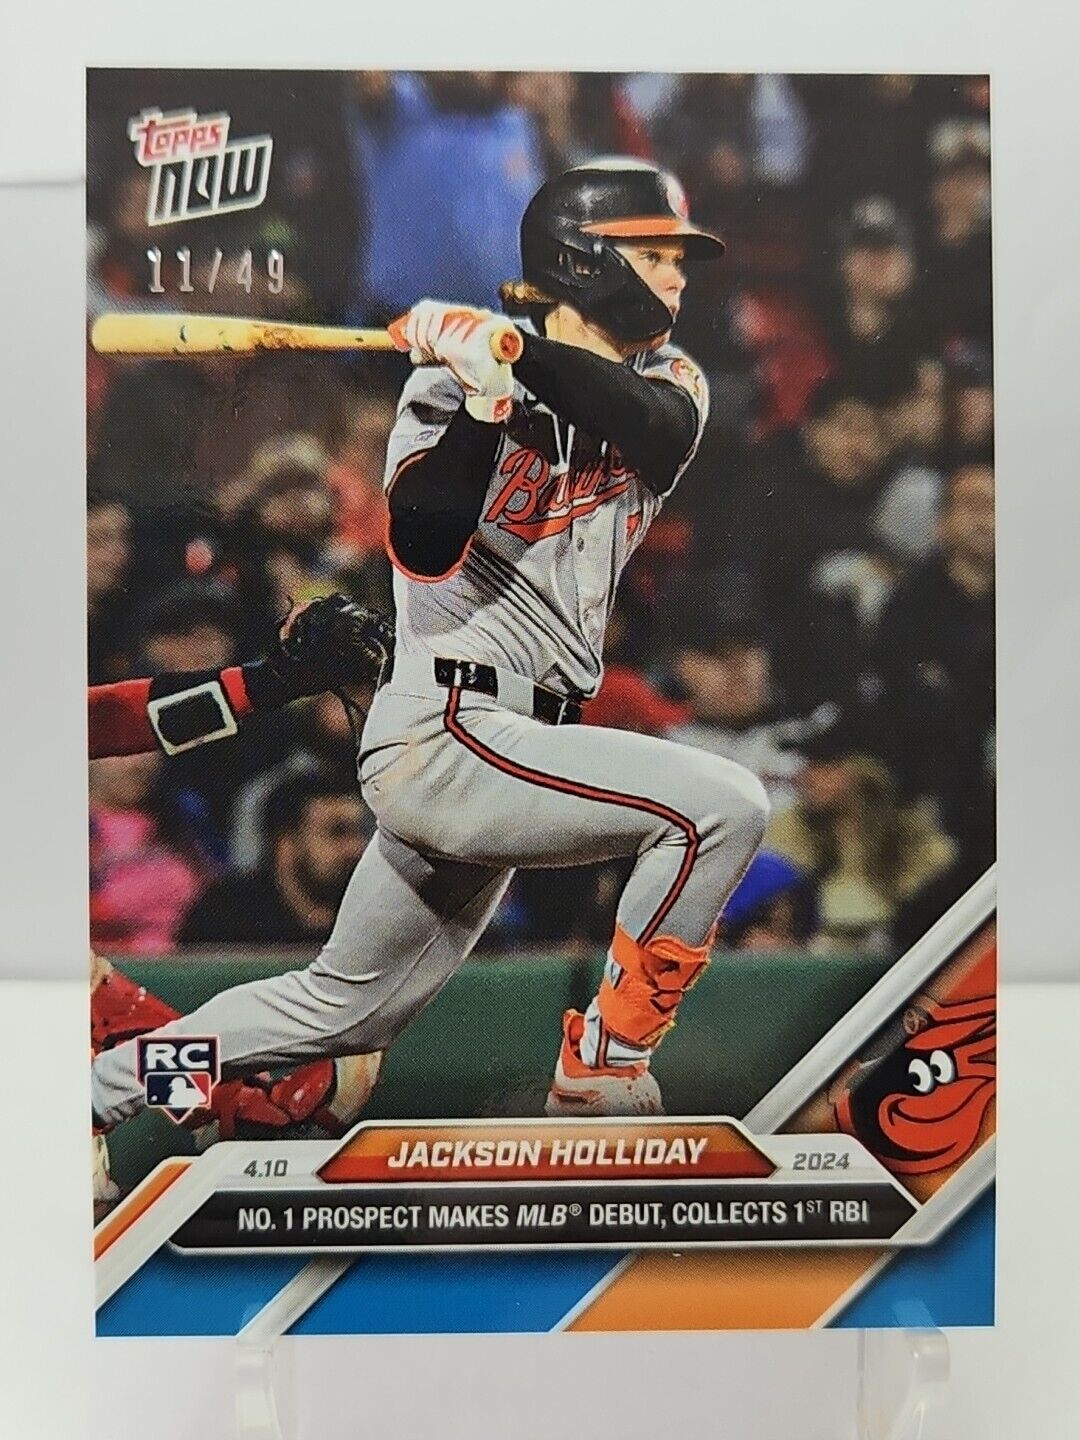 2024 Topps Now Jackson Holliday (RC) #61 11/49 SP MLB Debut Orioles MINT